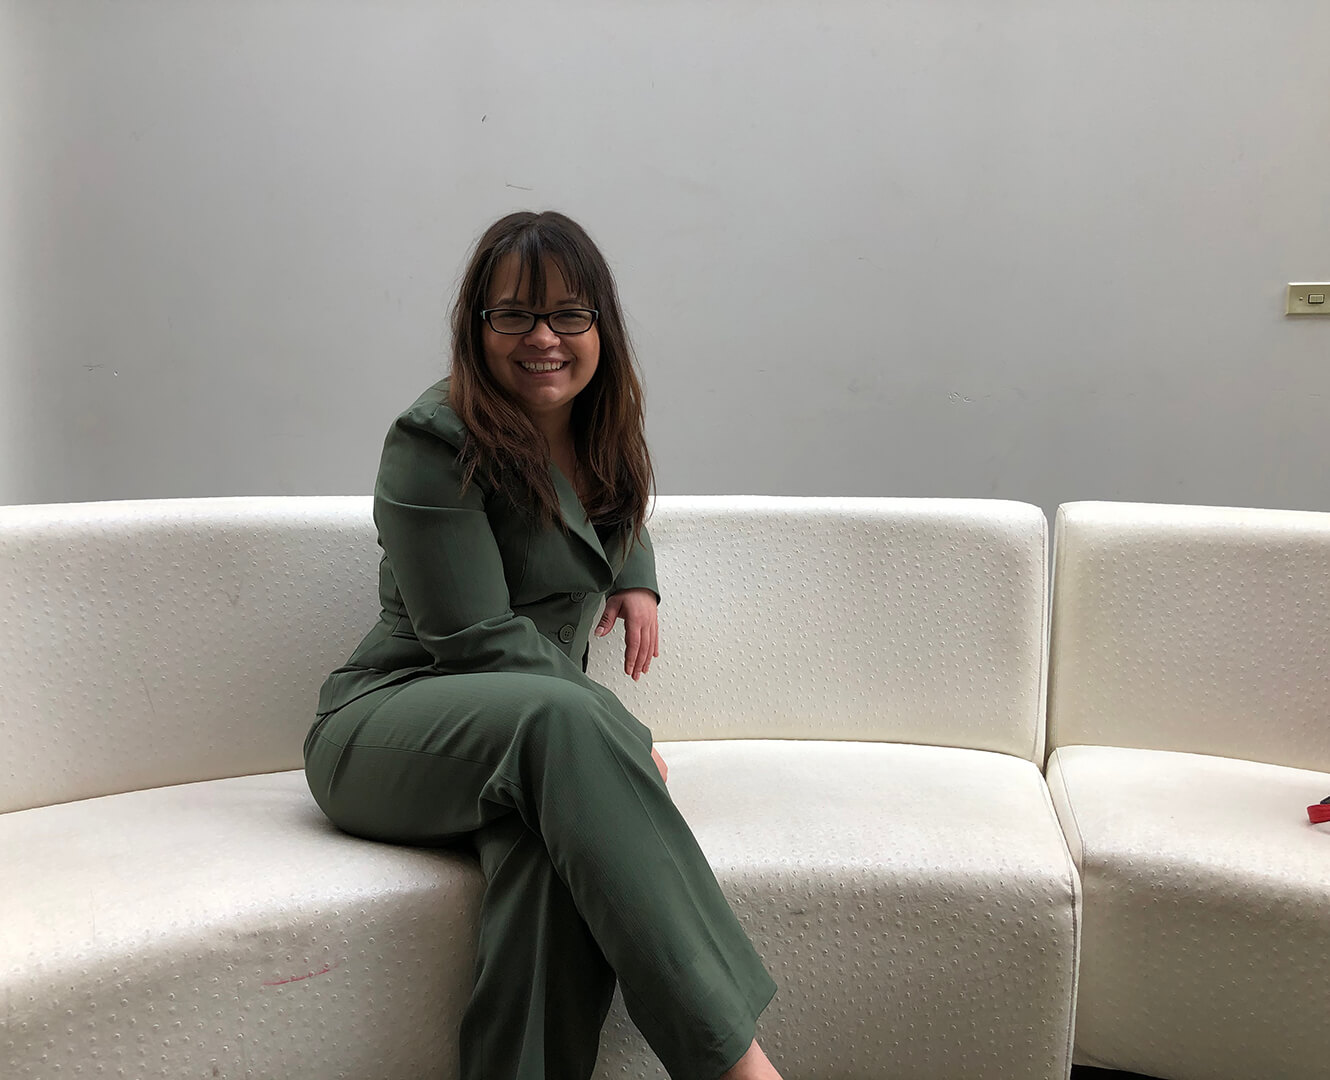 Woman sits on white couch smiling for photo